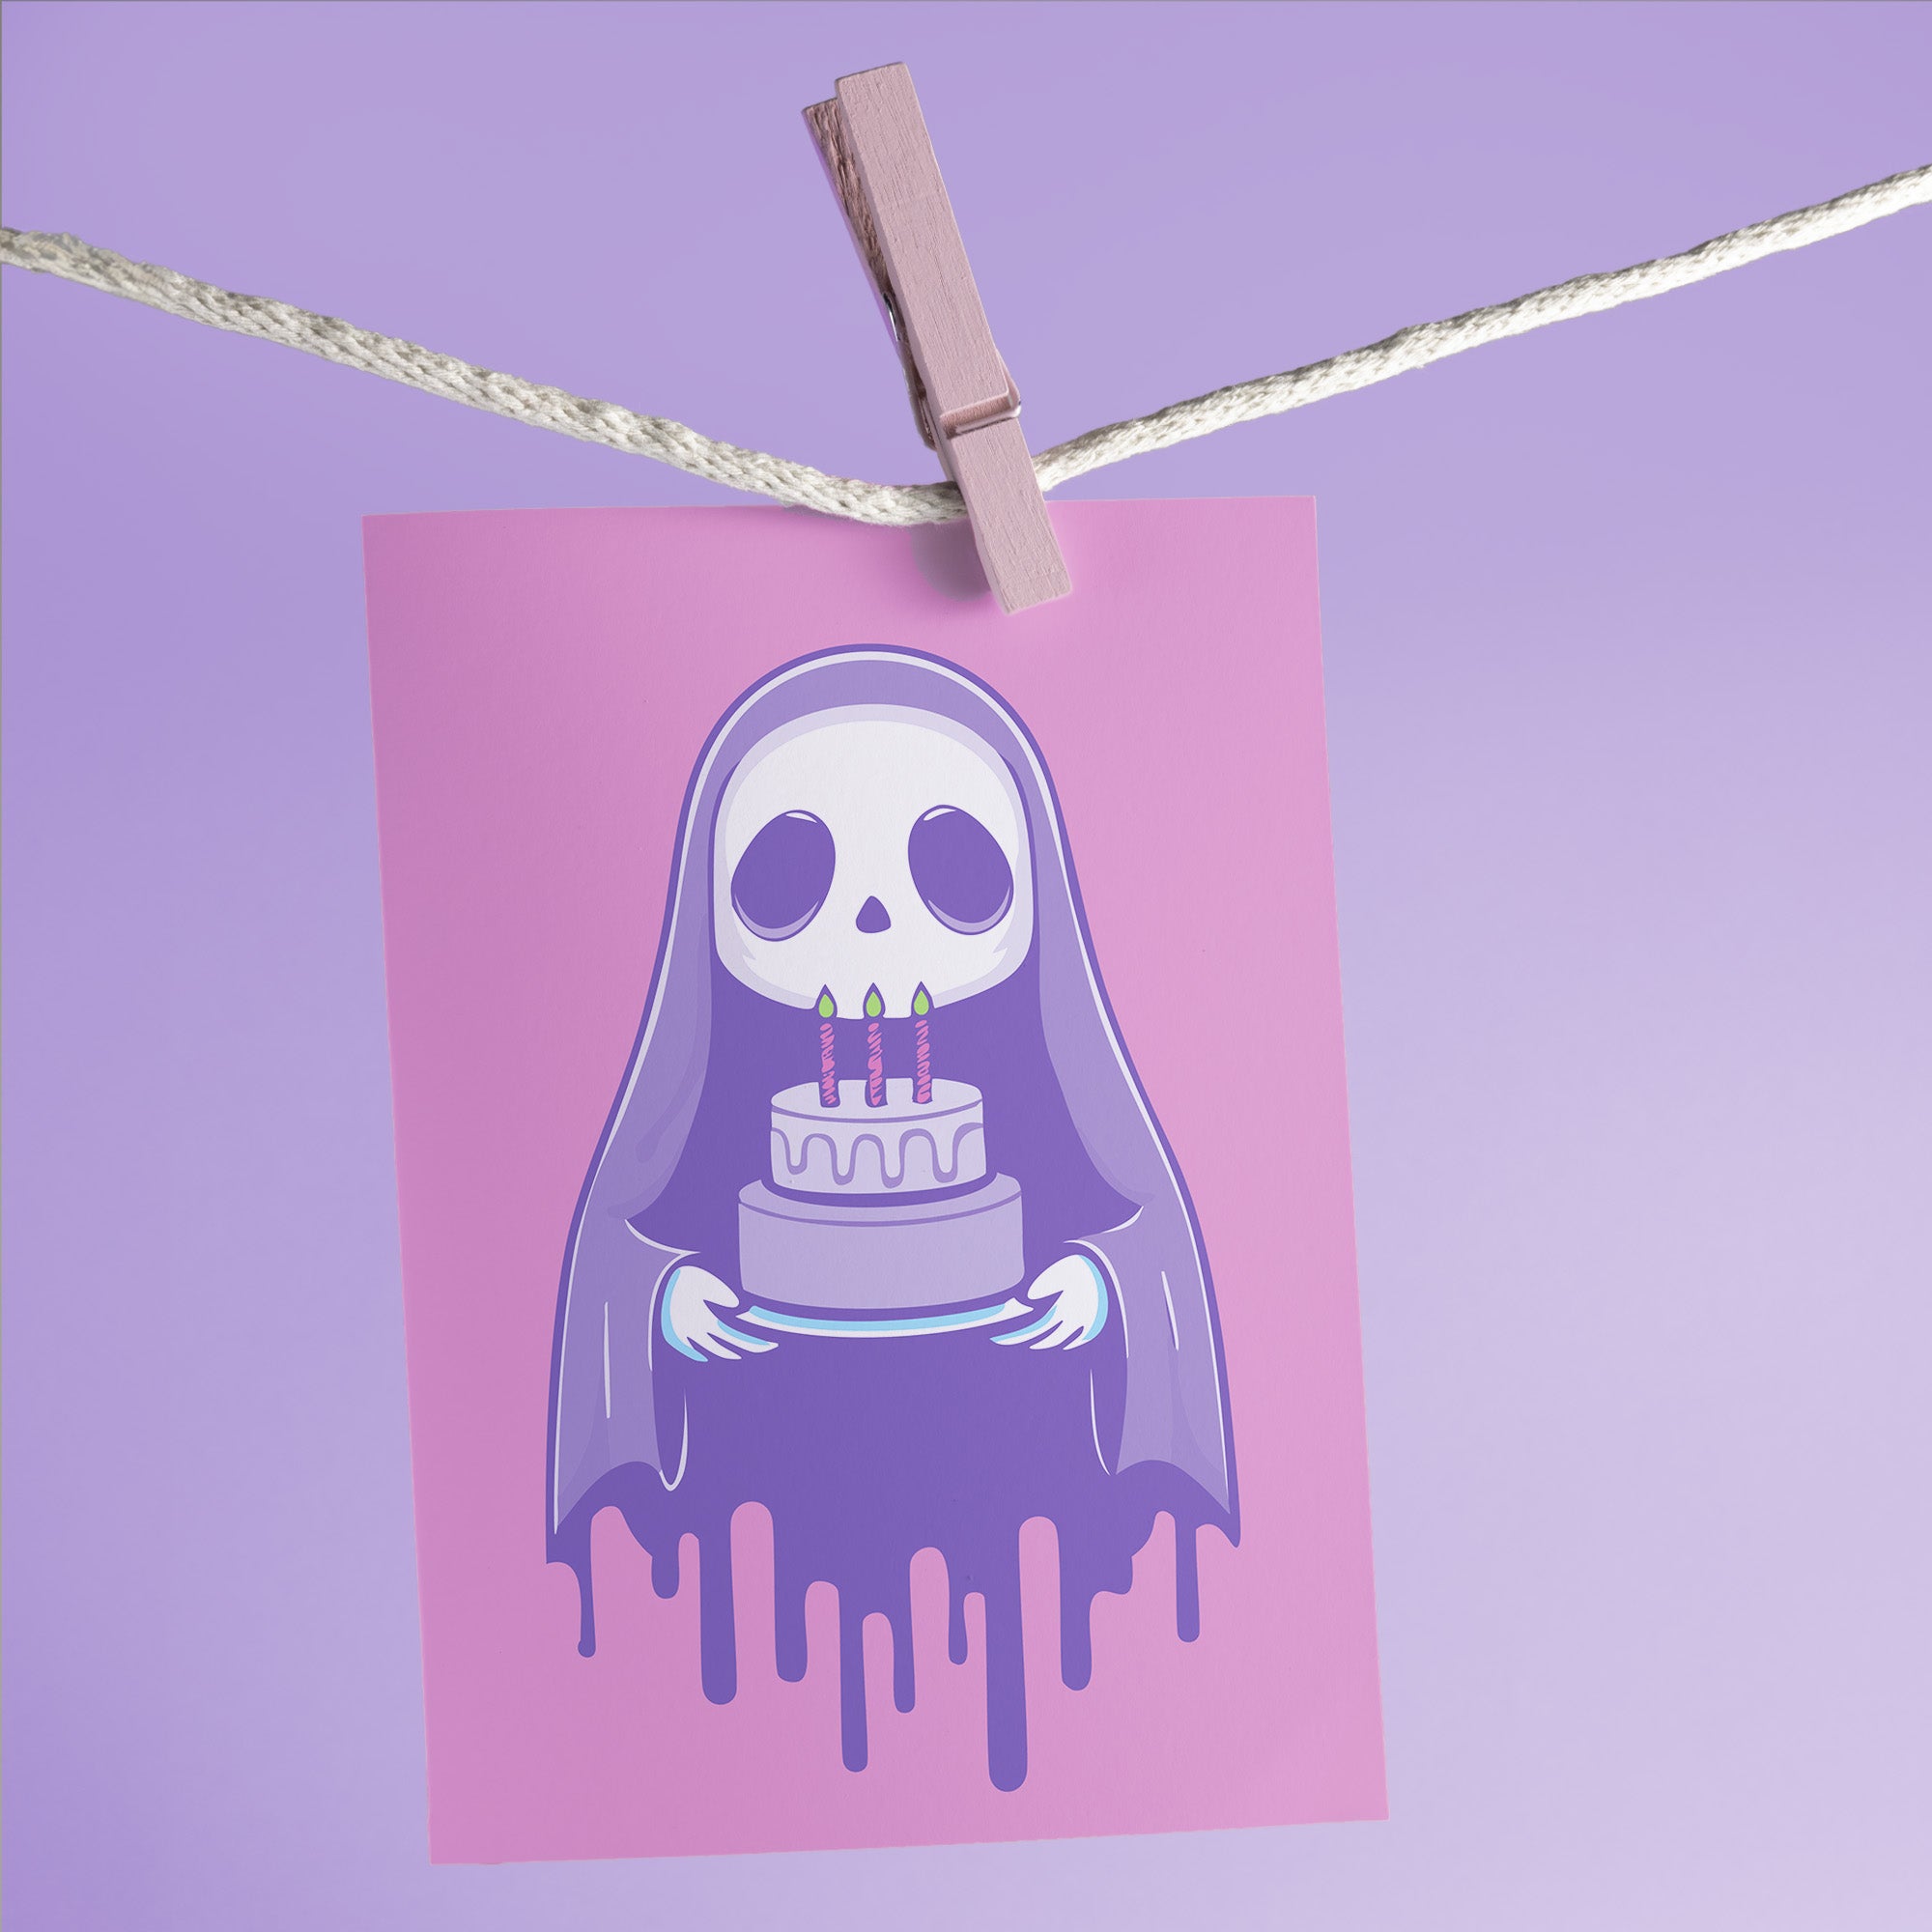 Birthday card featuring a cute cartoon grim reaper holding a birthday cake on pink background. The reaper wears a purple cloak and has a white skull face. It's carrying a small purple cake with three lit candles. The reaper's cloak drips like melting icing at the bottom. Ideal for Halloween birthdays or gothic-themed celebrations. Inside greeting: 